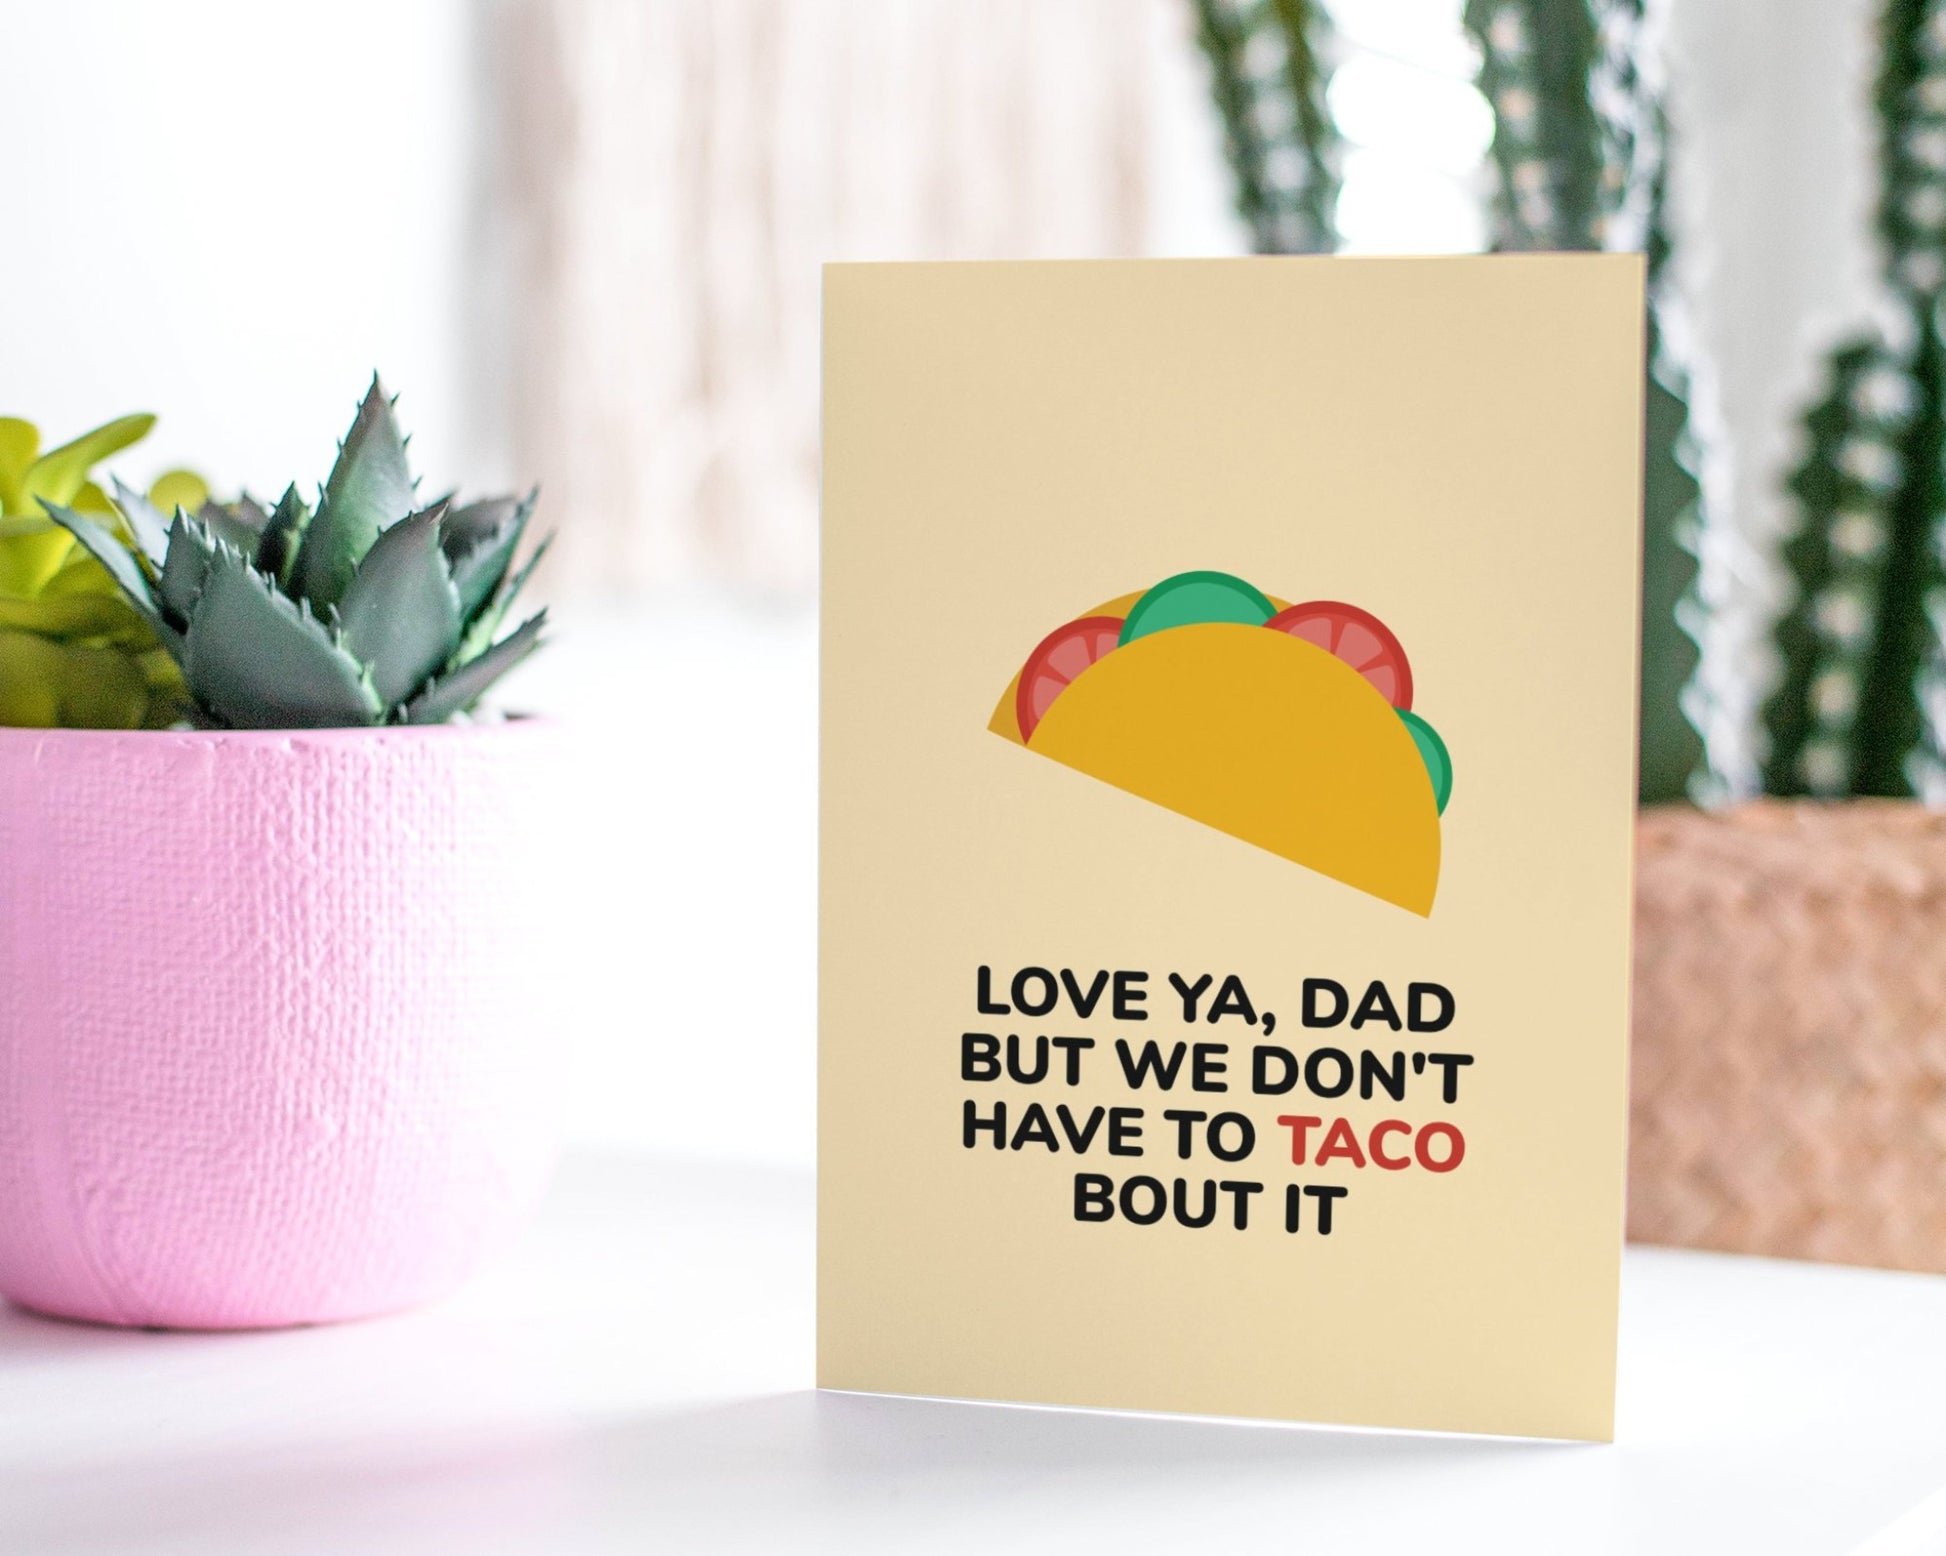 Taco Greeting Card For Dad.